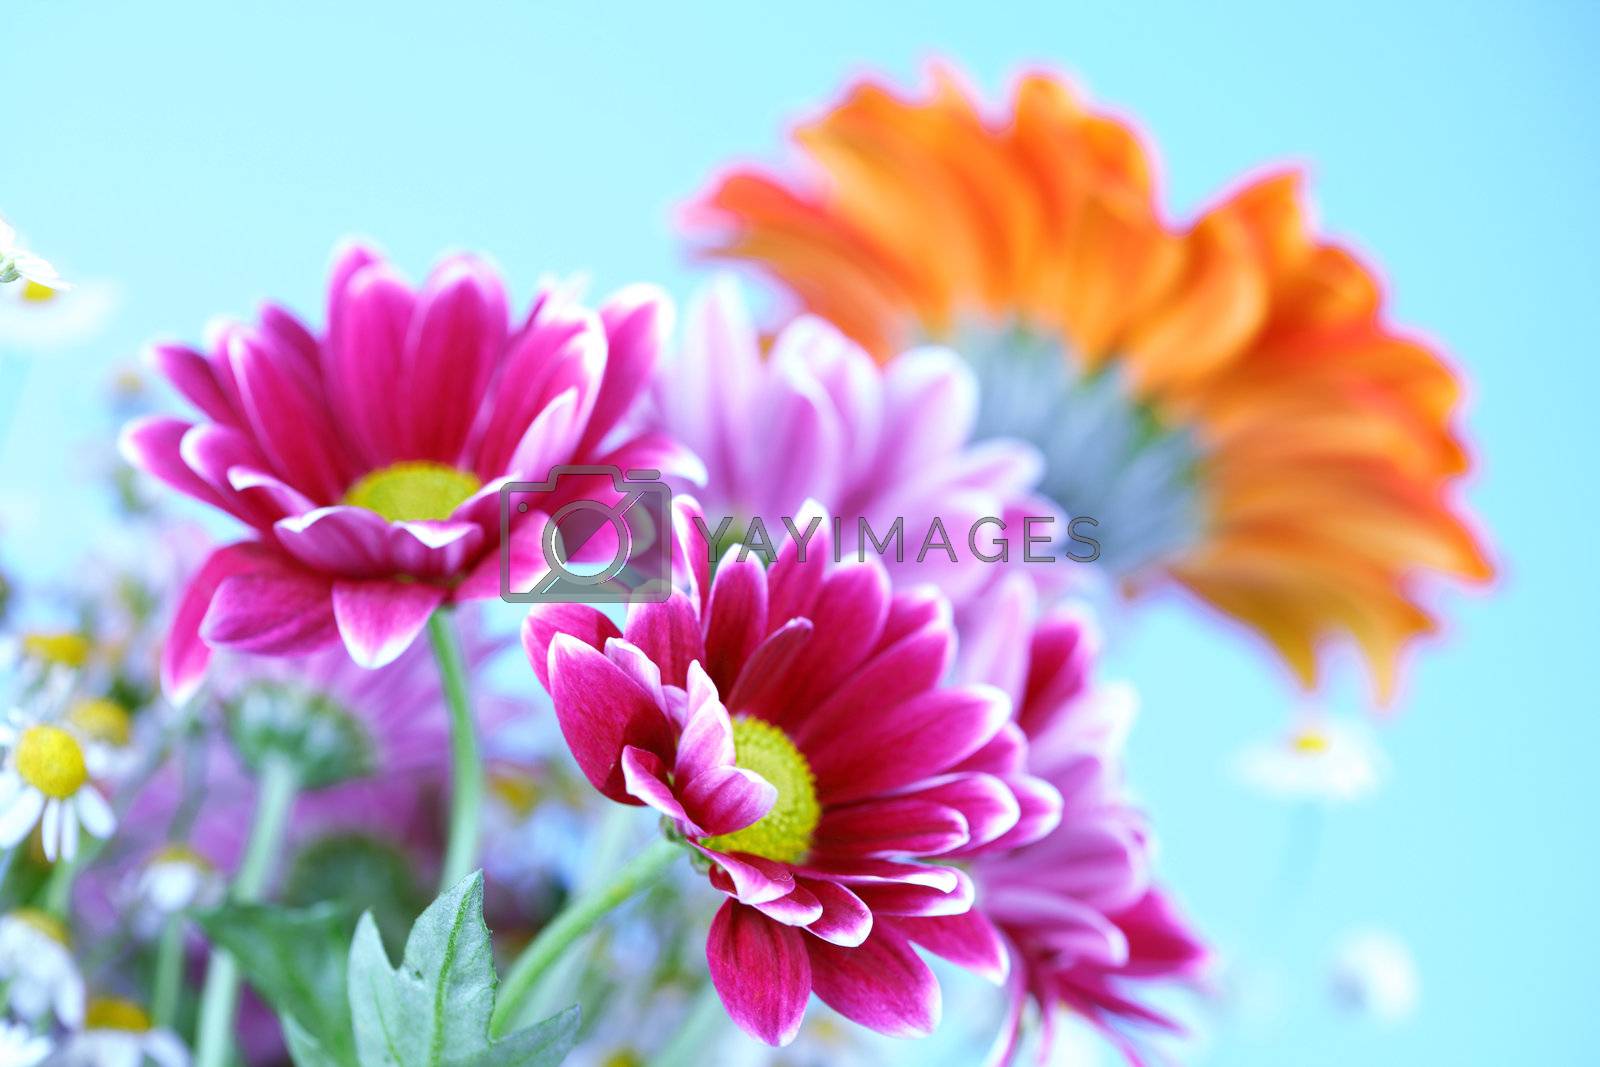 Royalty free image of colourful summer flowers by Yellowj